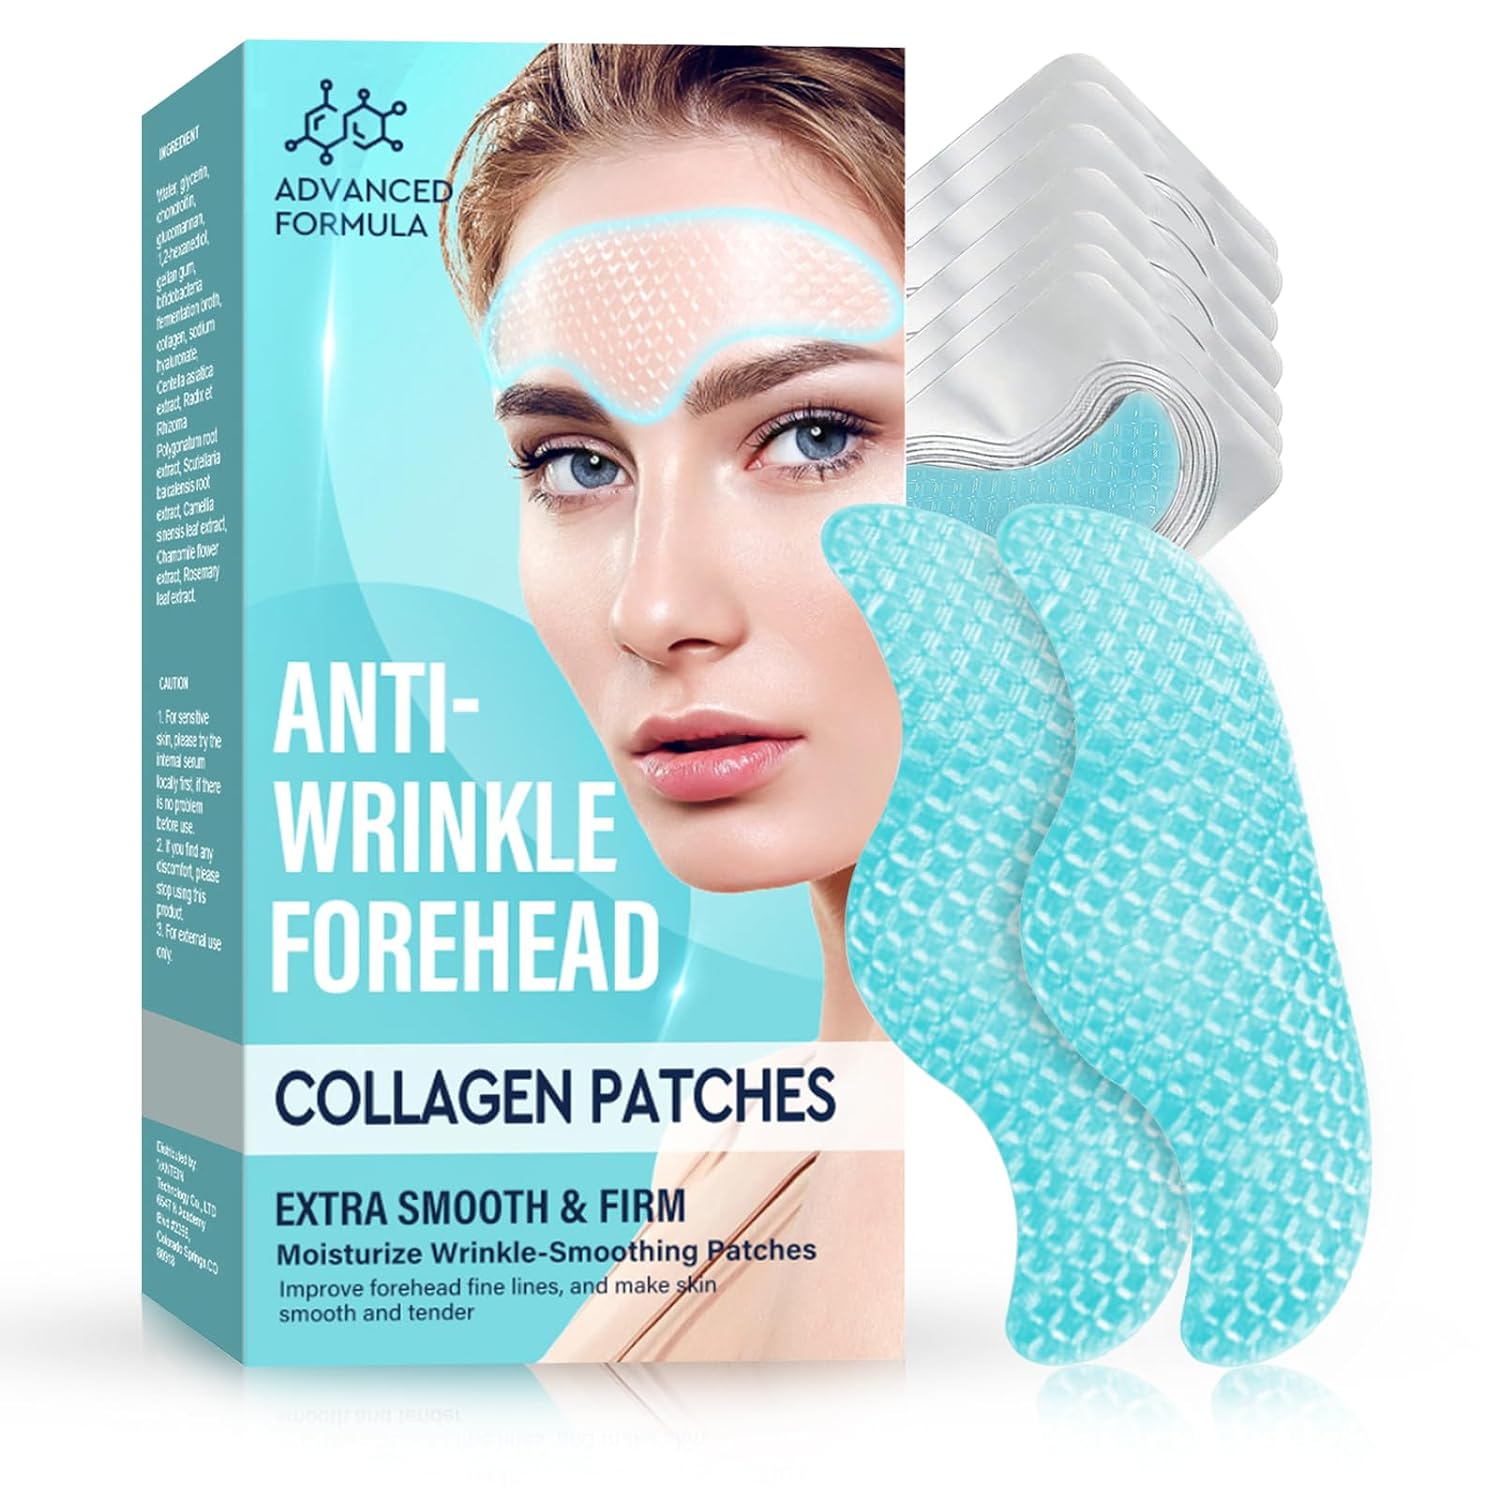 Copeaky Forehead Wrinkle Patches, Anti-Wrinkle Patches